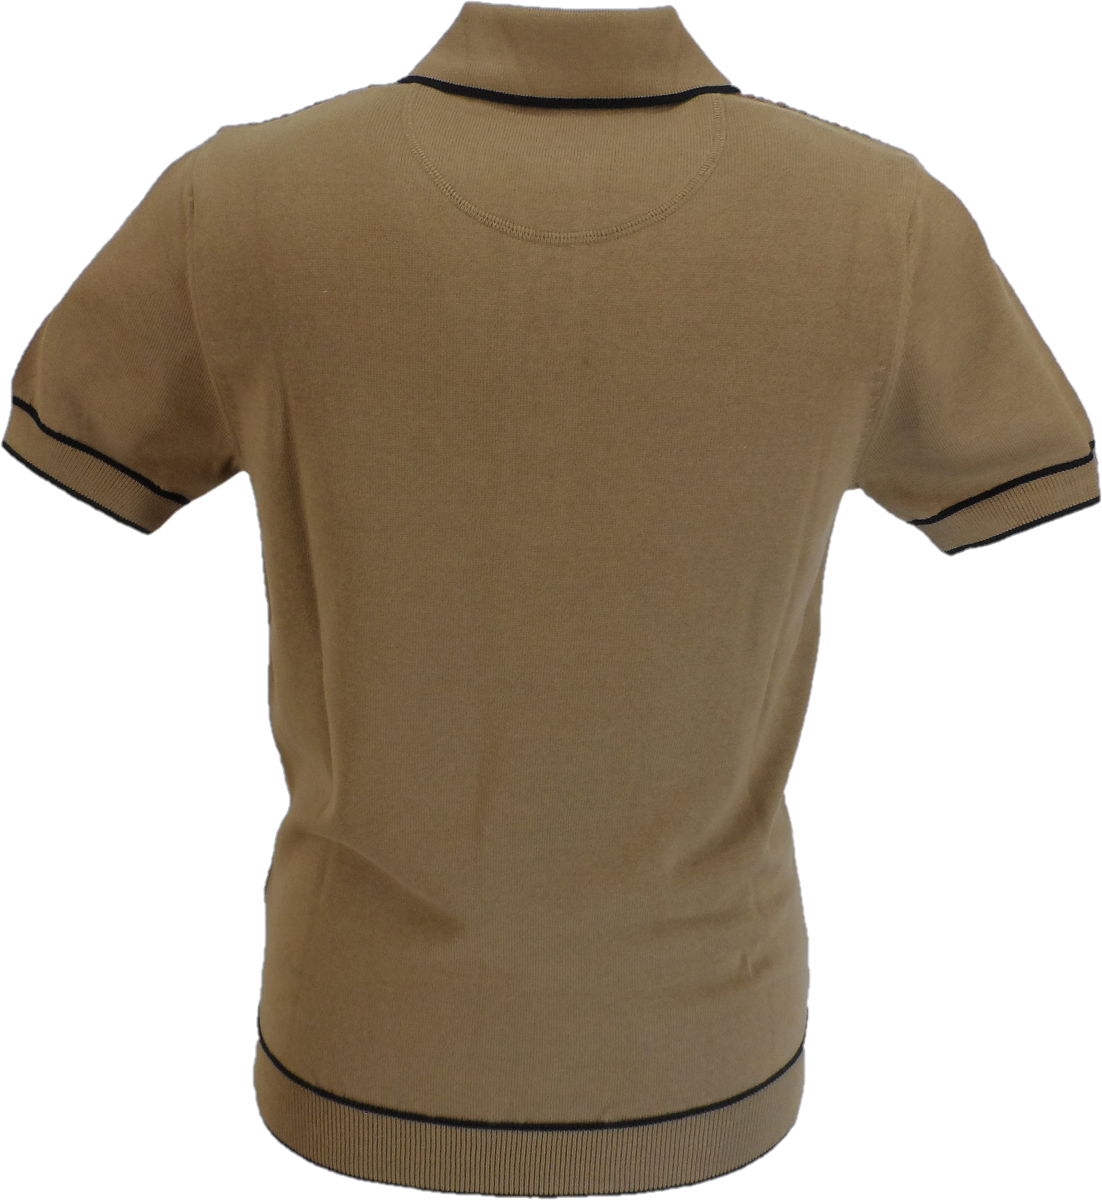 Trojan Records Mens Camel Brown Textured Knitted Polo Shirt